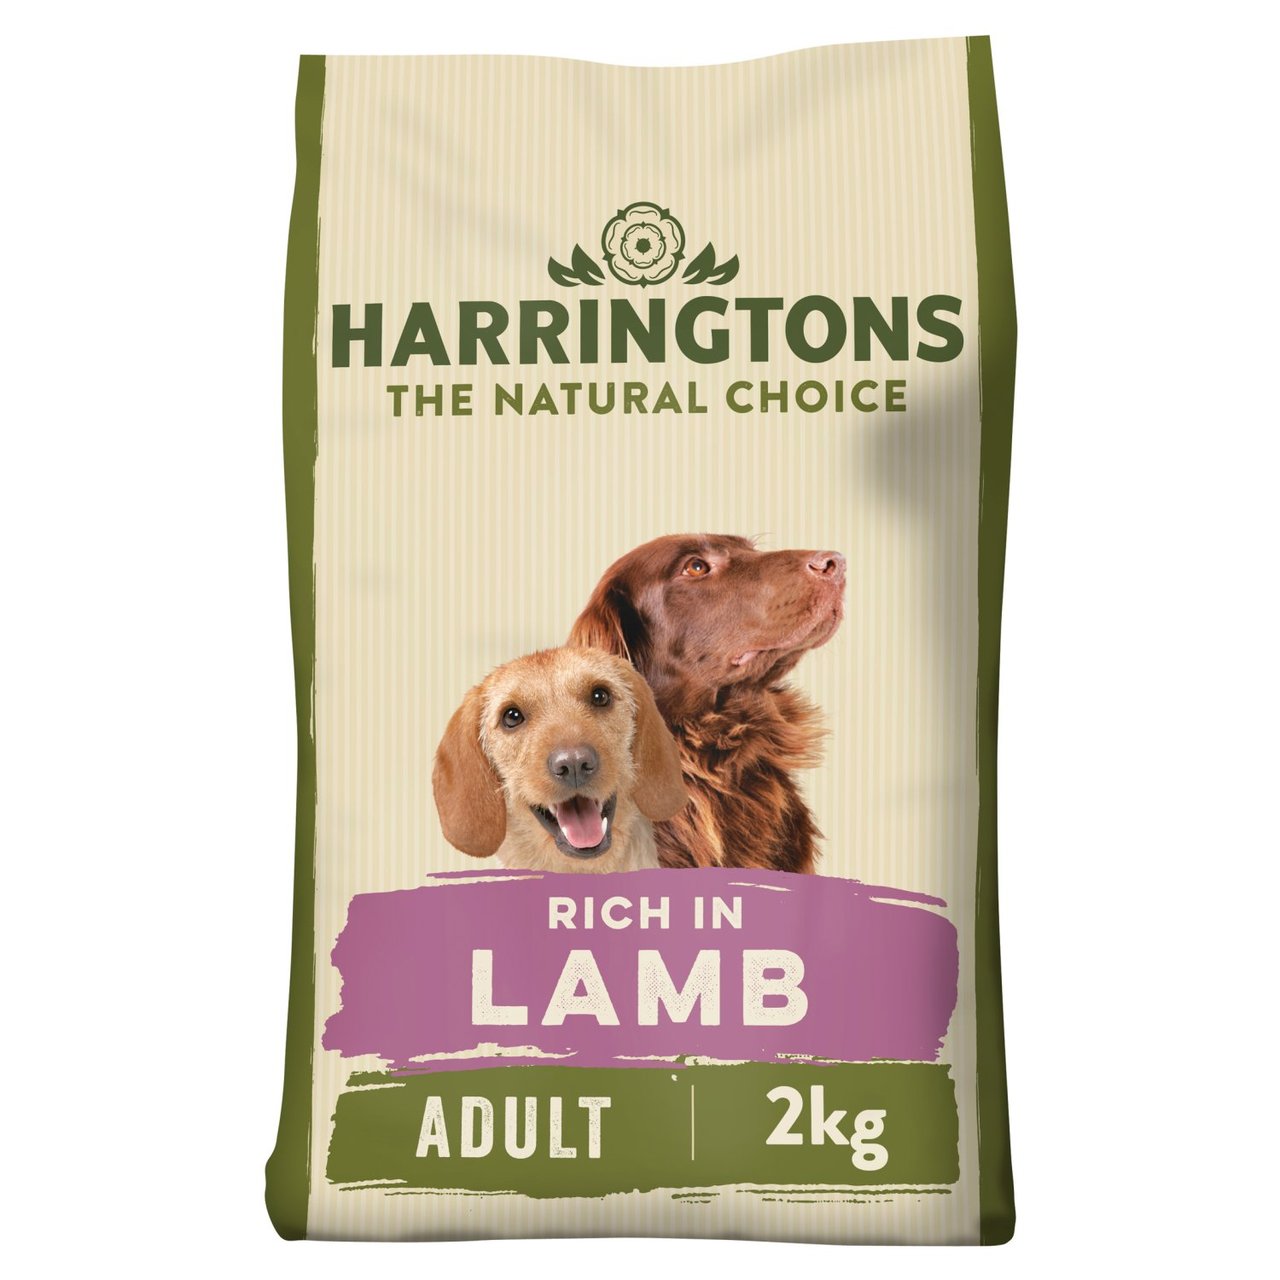 An image of Harringtons Dog Complete Lamb & Rice